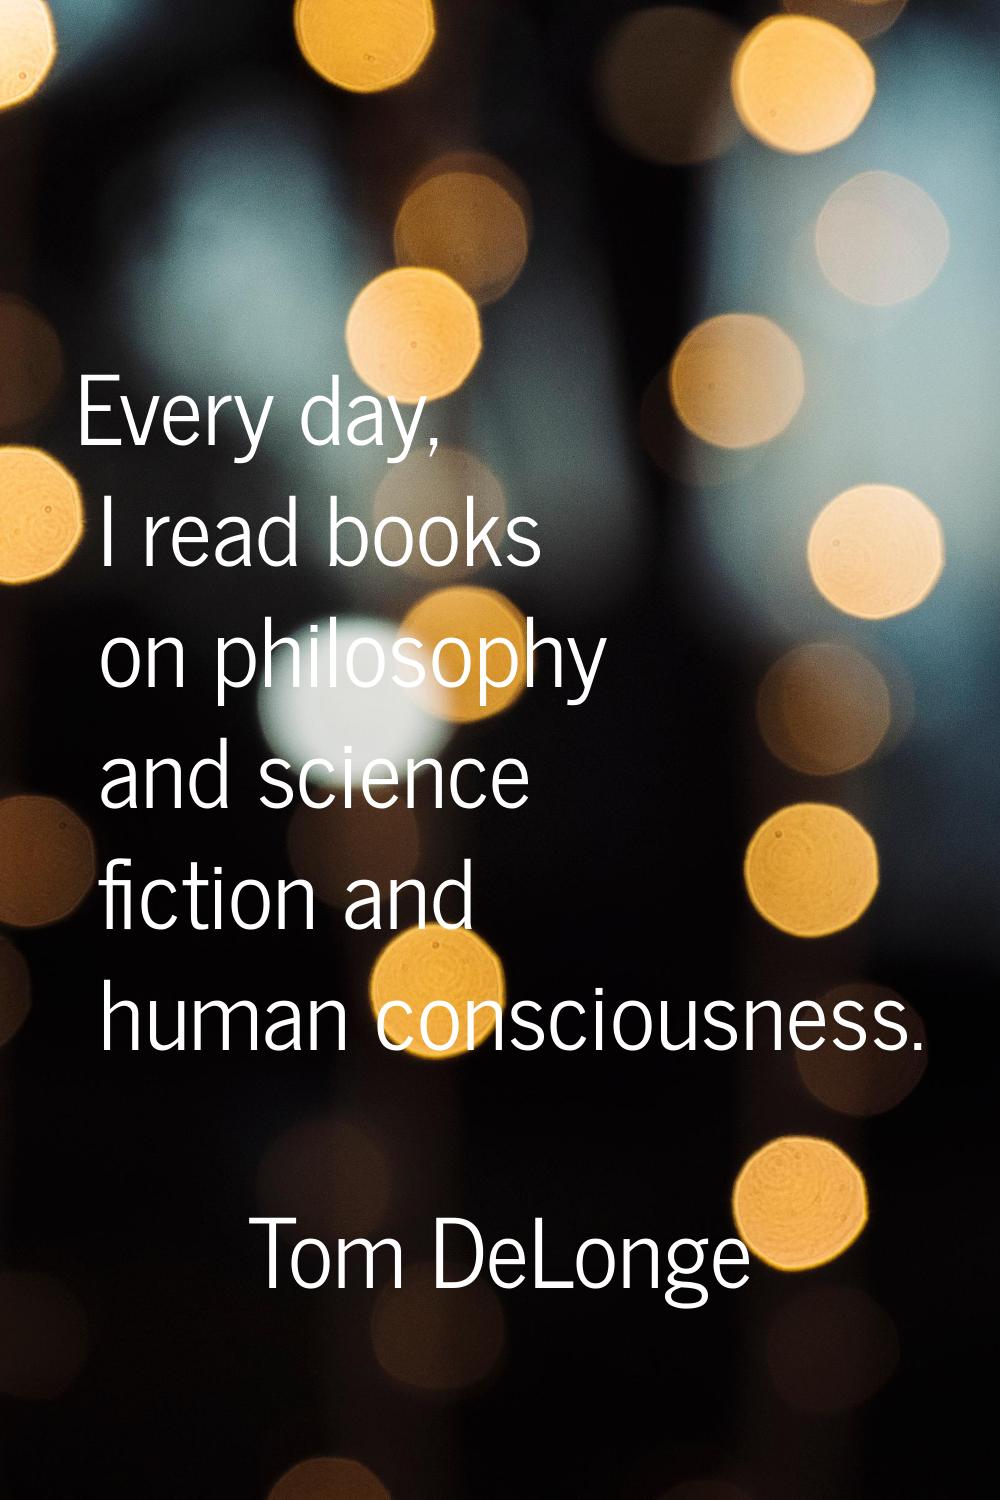 Every day, I read books on philosophy and science fiction and human consciousness.